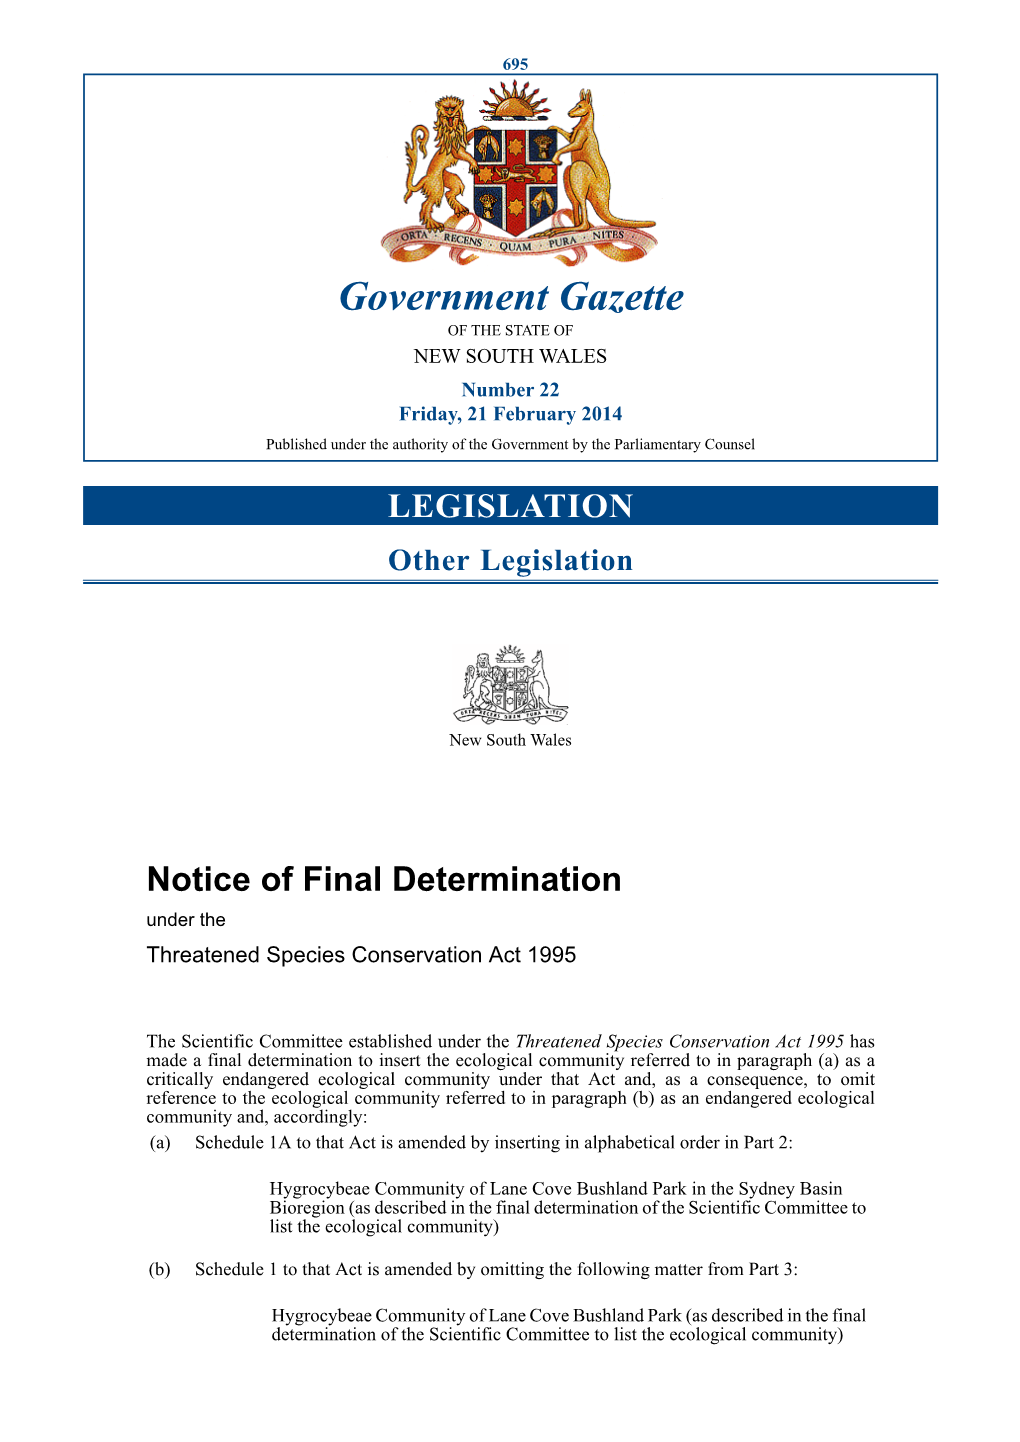 Government Gazette of the STATE of NEW SOUTH WALES Number 22 Friday, 21 February 2014 Published Under the Authority of the Government by the Parliamentary Counsel